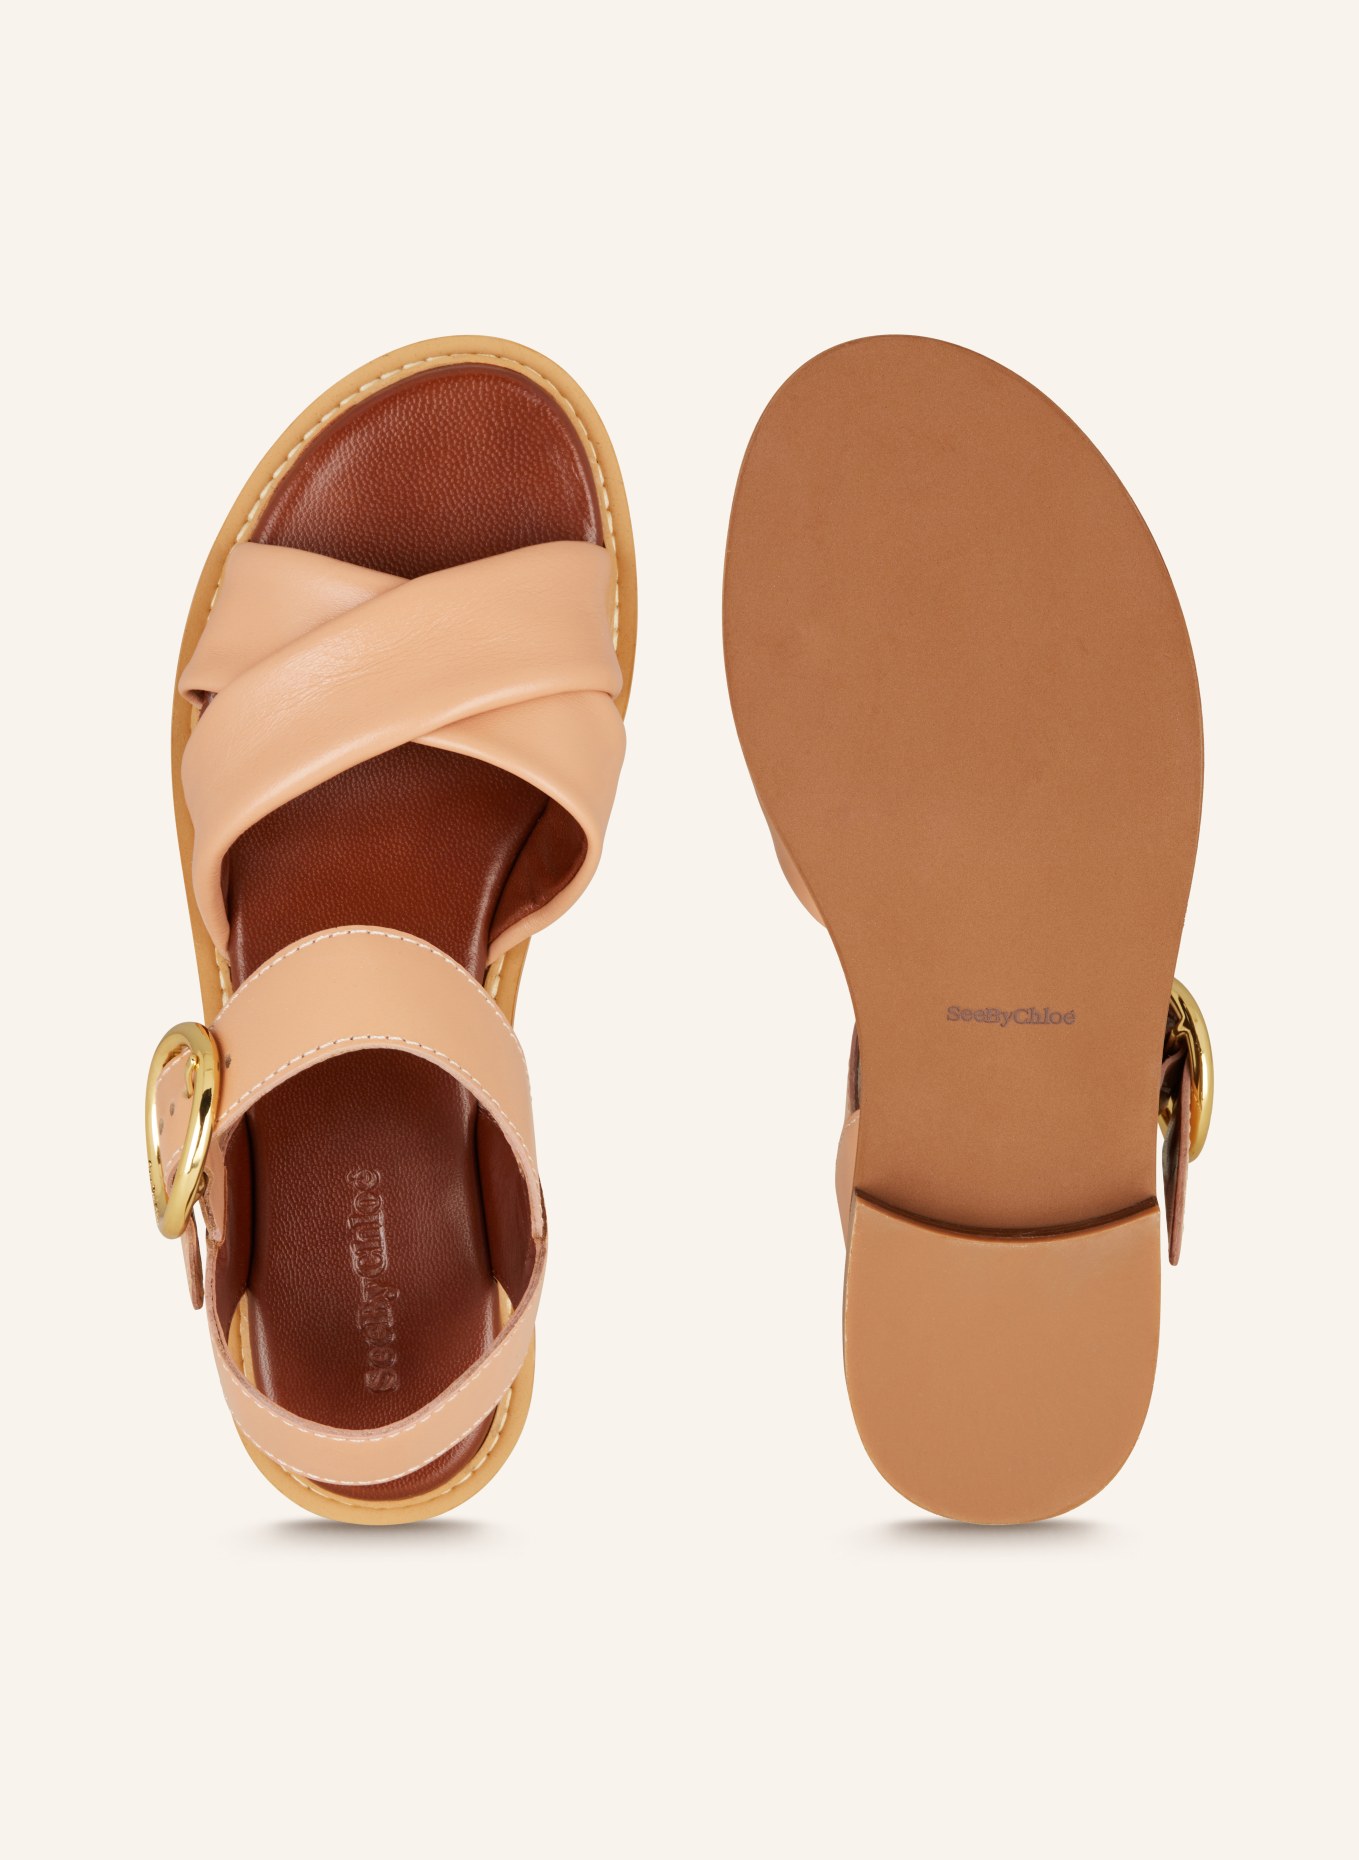 SEE BY CHLOÉ Sandals LYNA, Color: 348 nude (Image 5)